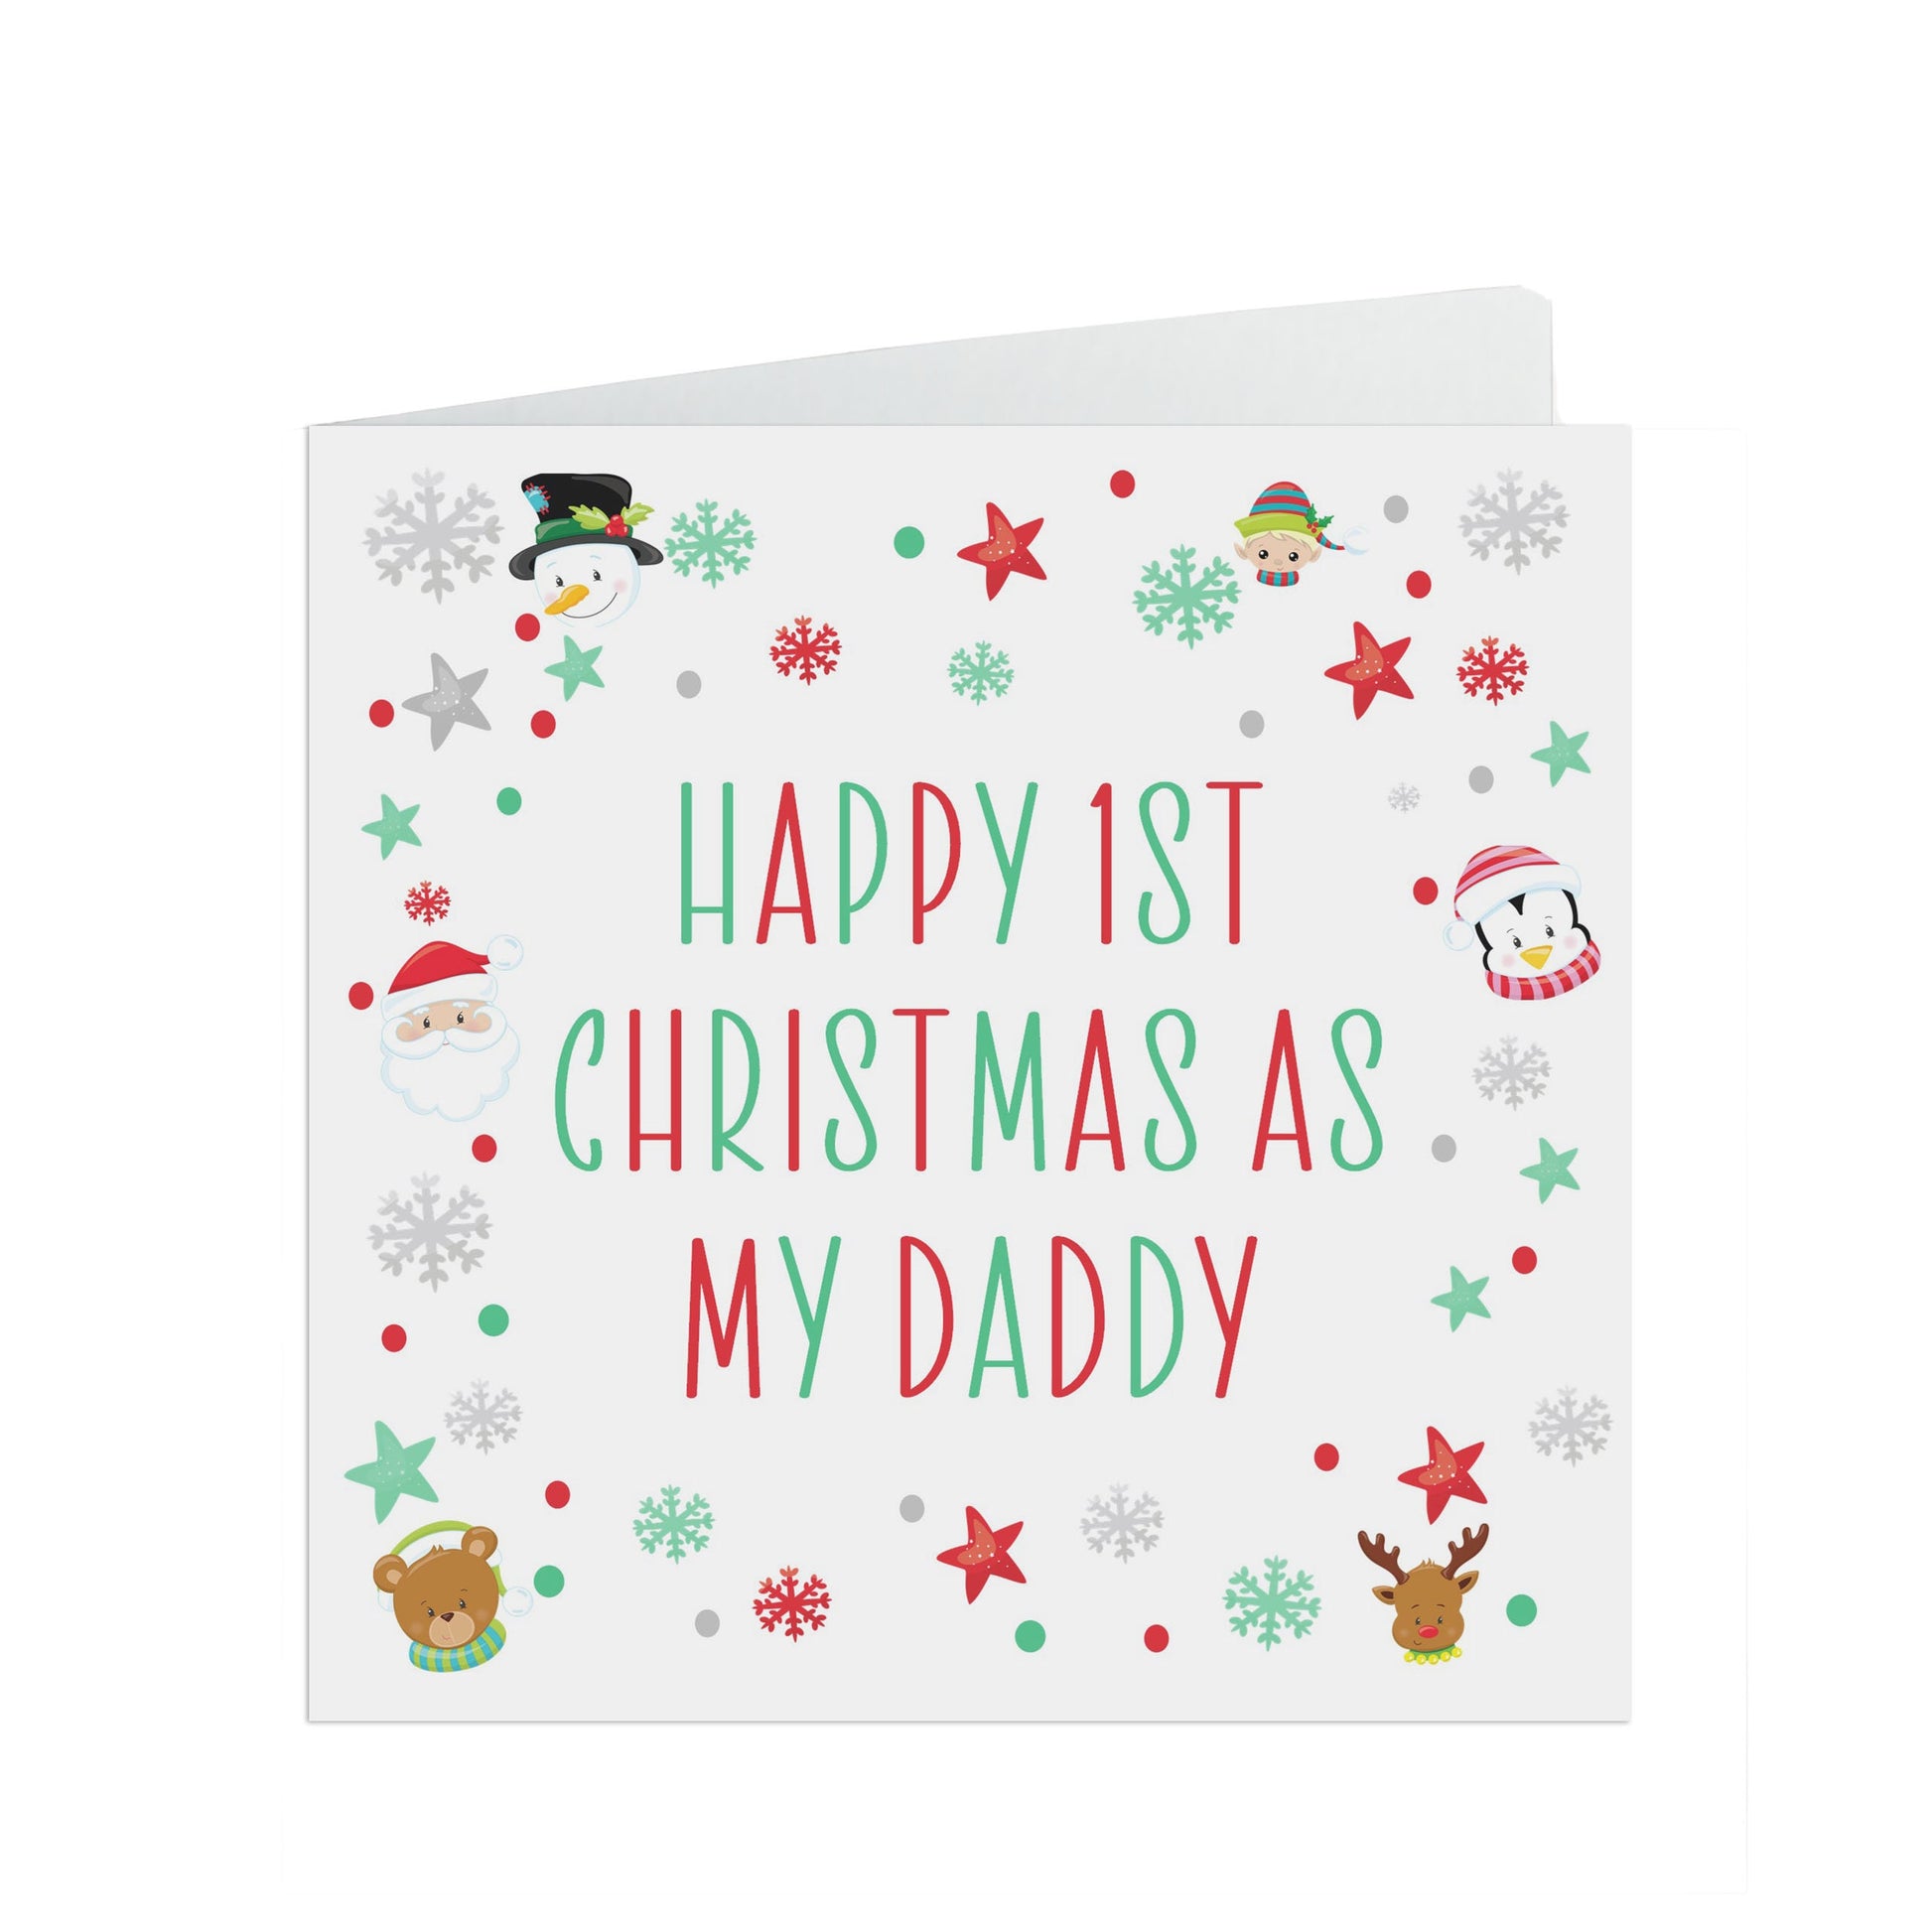 First Christmas As My Daddy, Colourful 1st Christmas Card From Son or Daughter